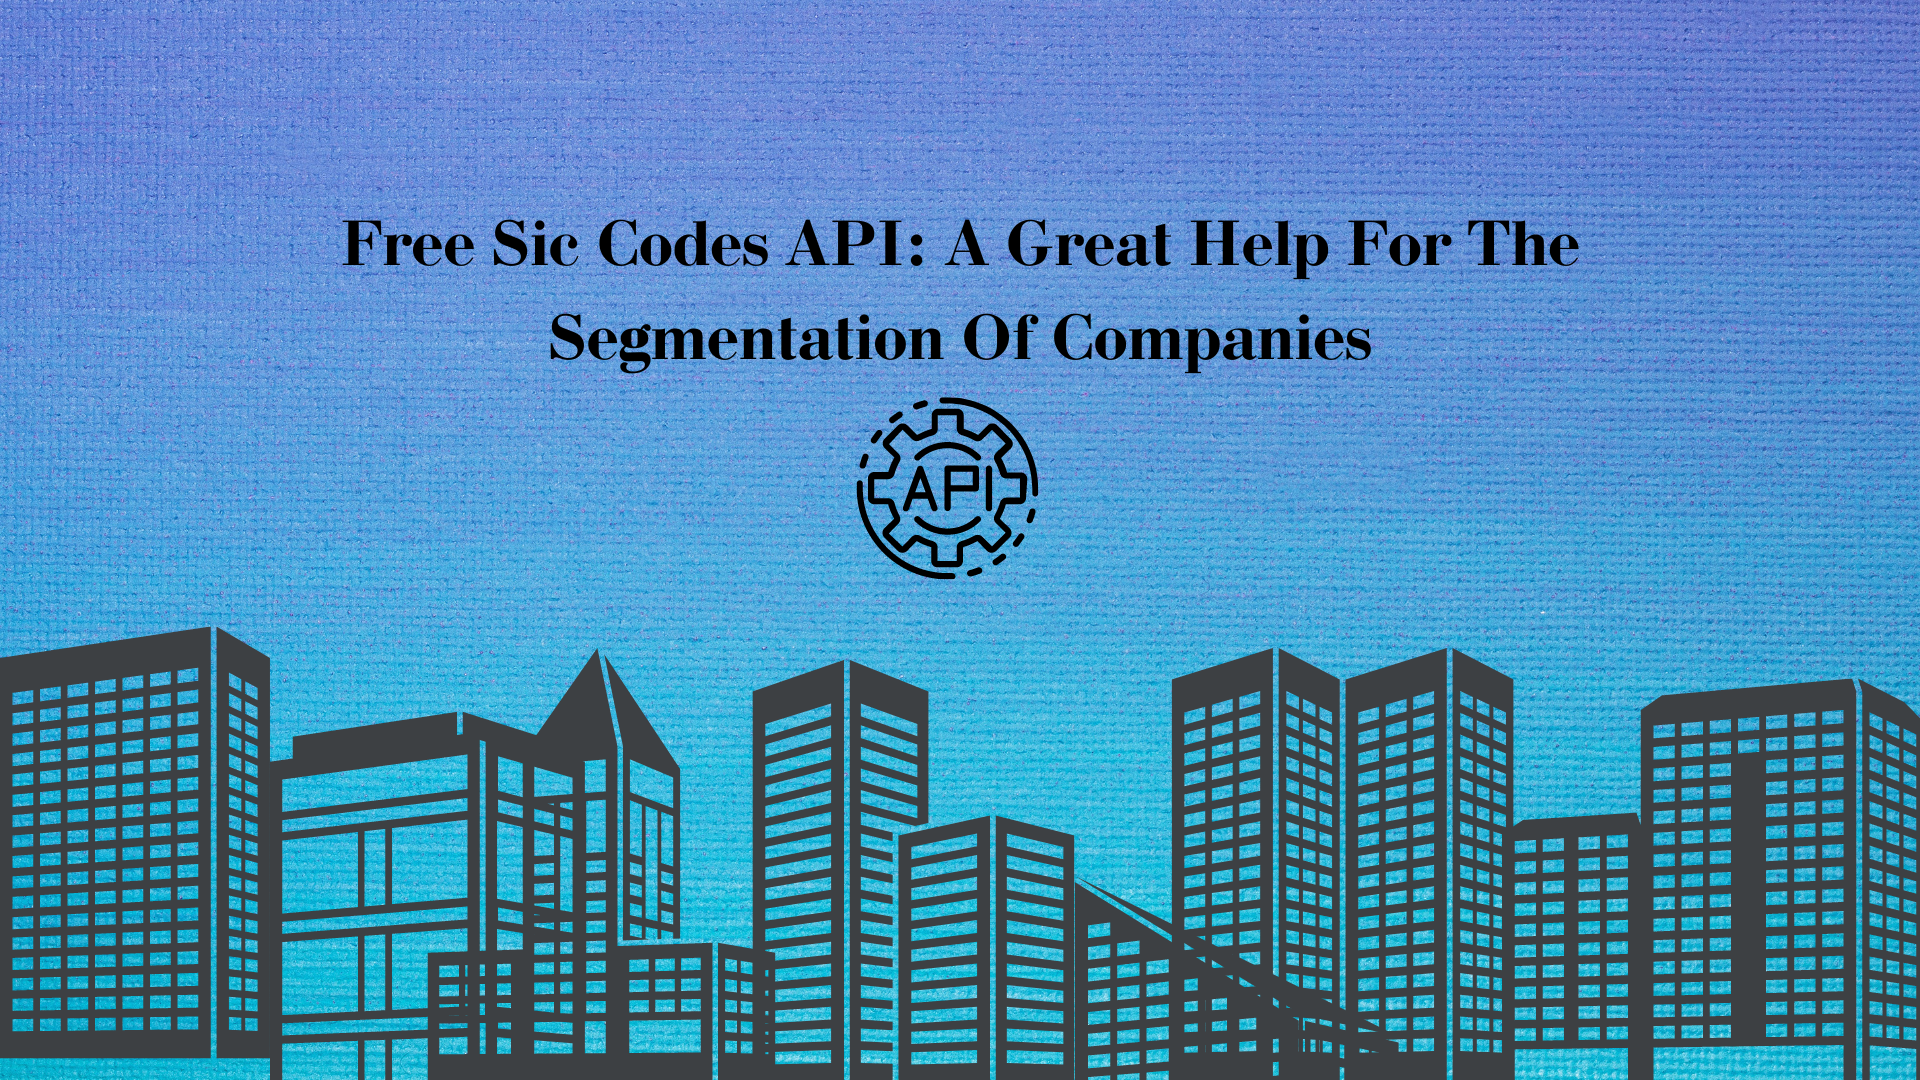 Free Sic Codes API: A Great Help For The Segmentation Of Companies